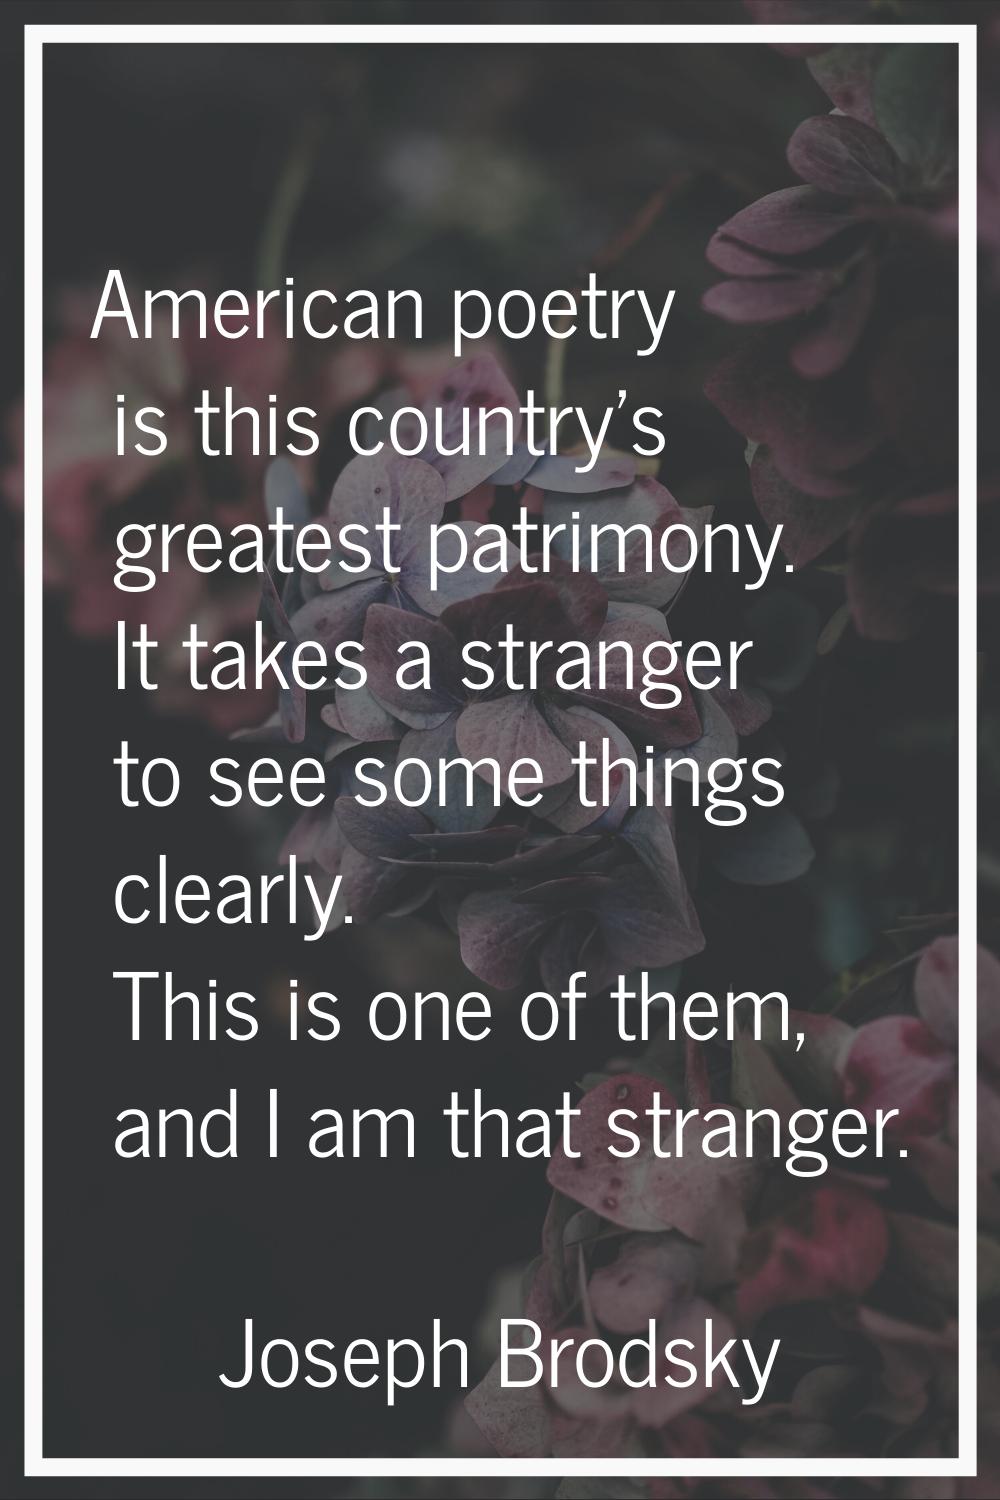 American poetry is this country's greatest patrimony. It takes a stranger to see some things clearl